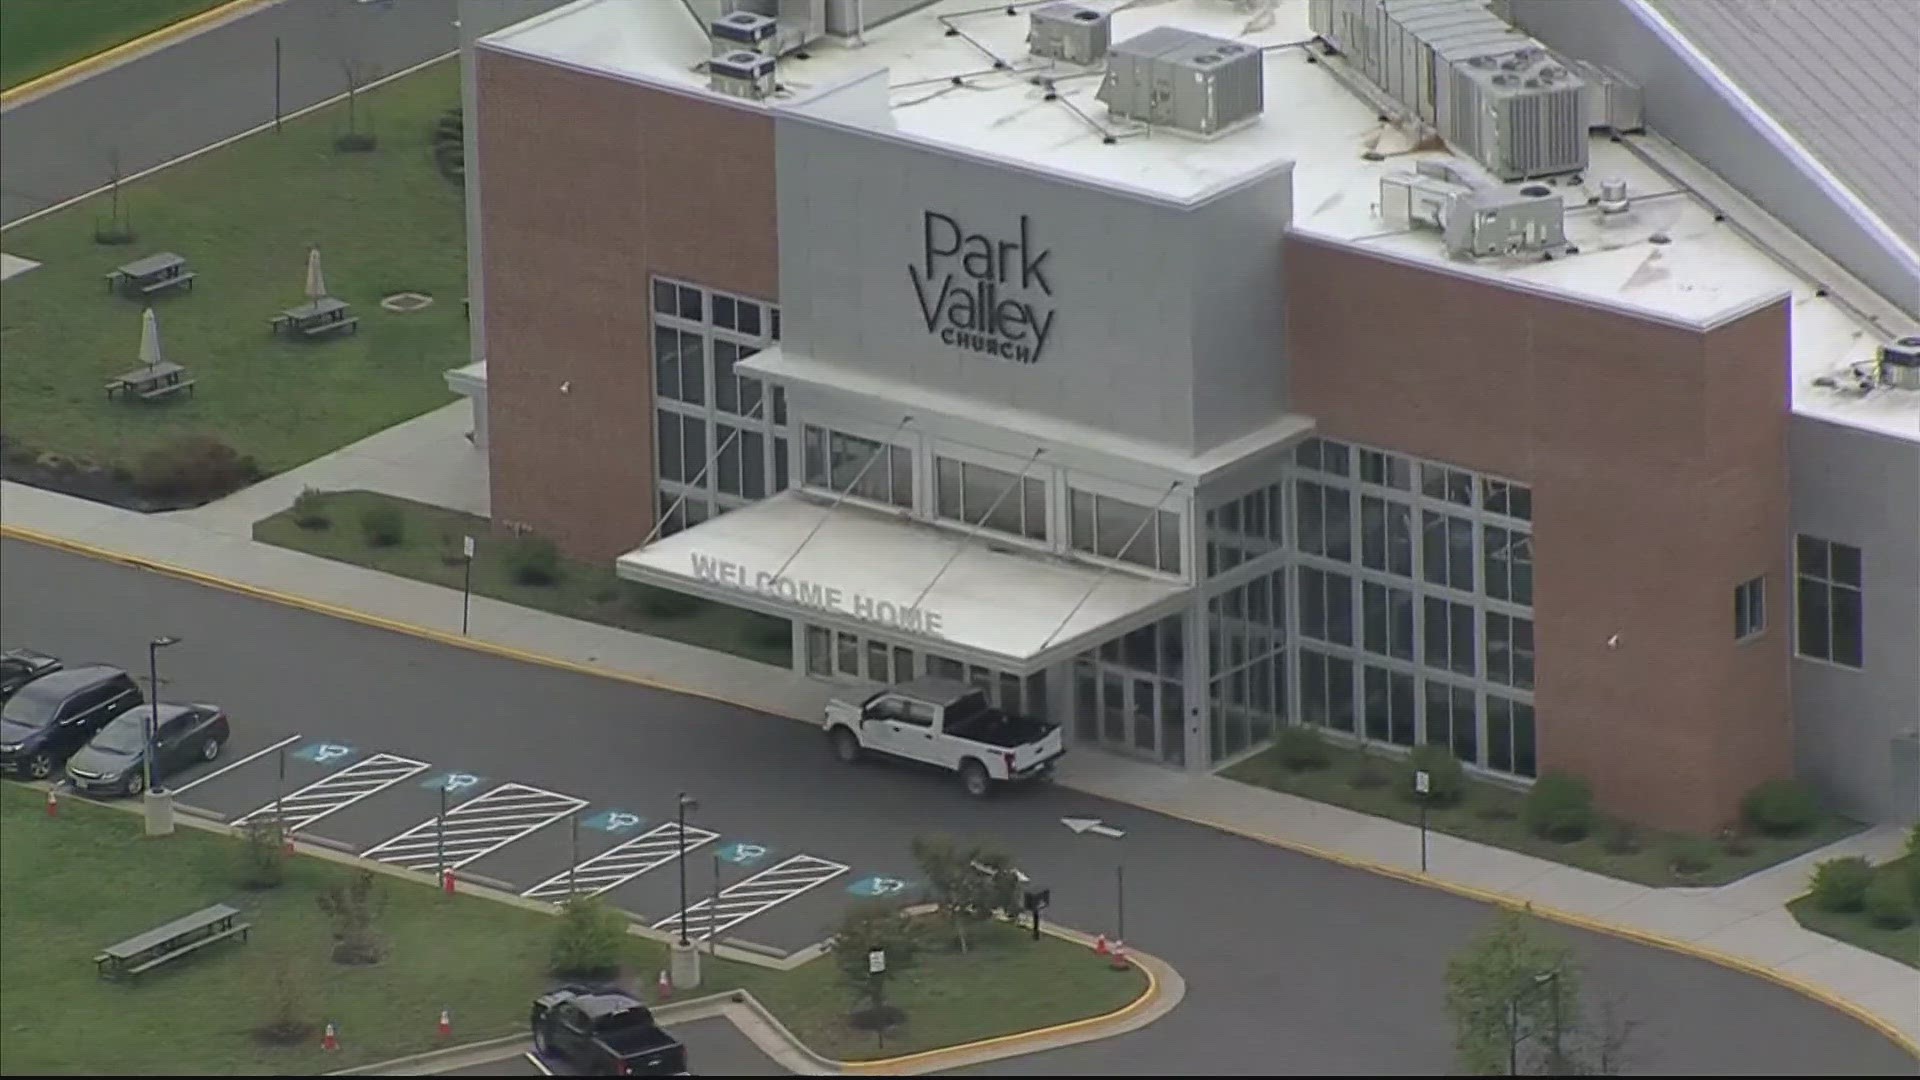 Rui Jiang, 35, of Falls Church, was arrested with a loaded gun at Park Valley Church after police say he made threats against that church.